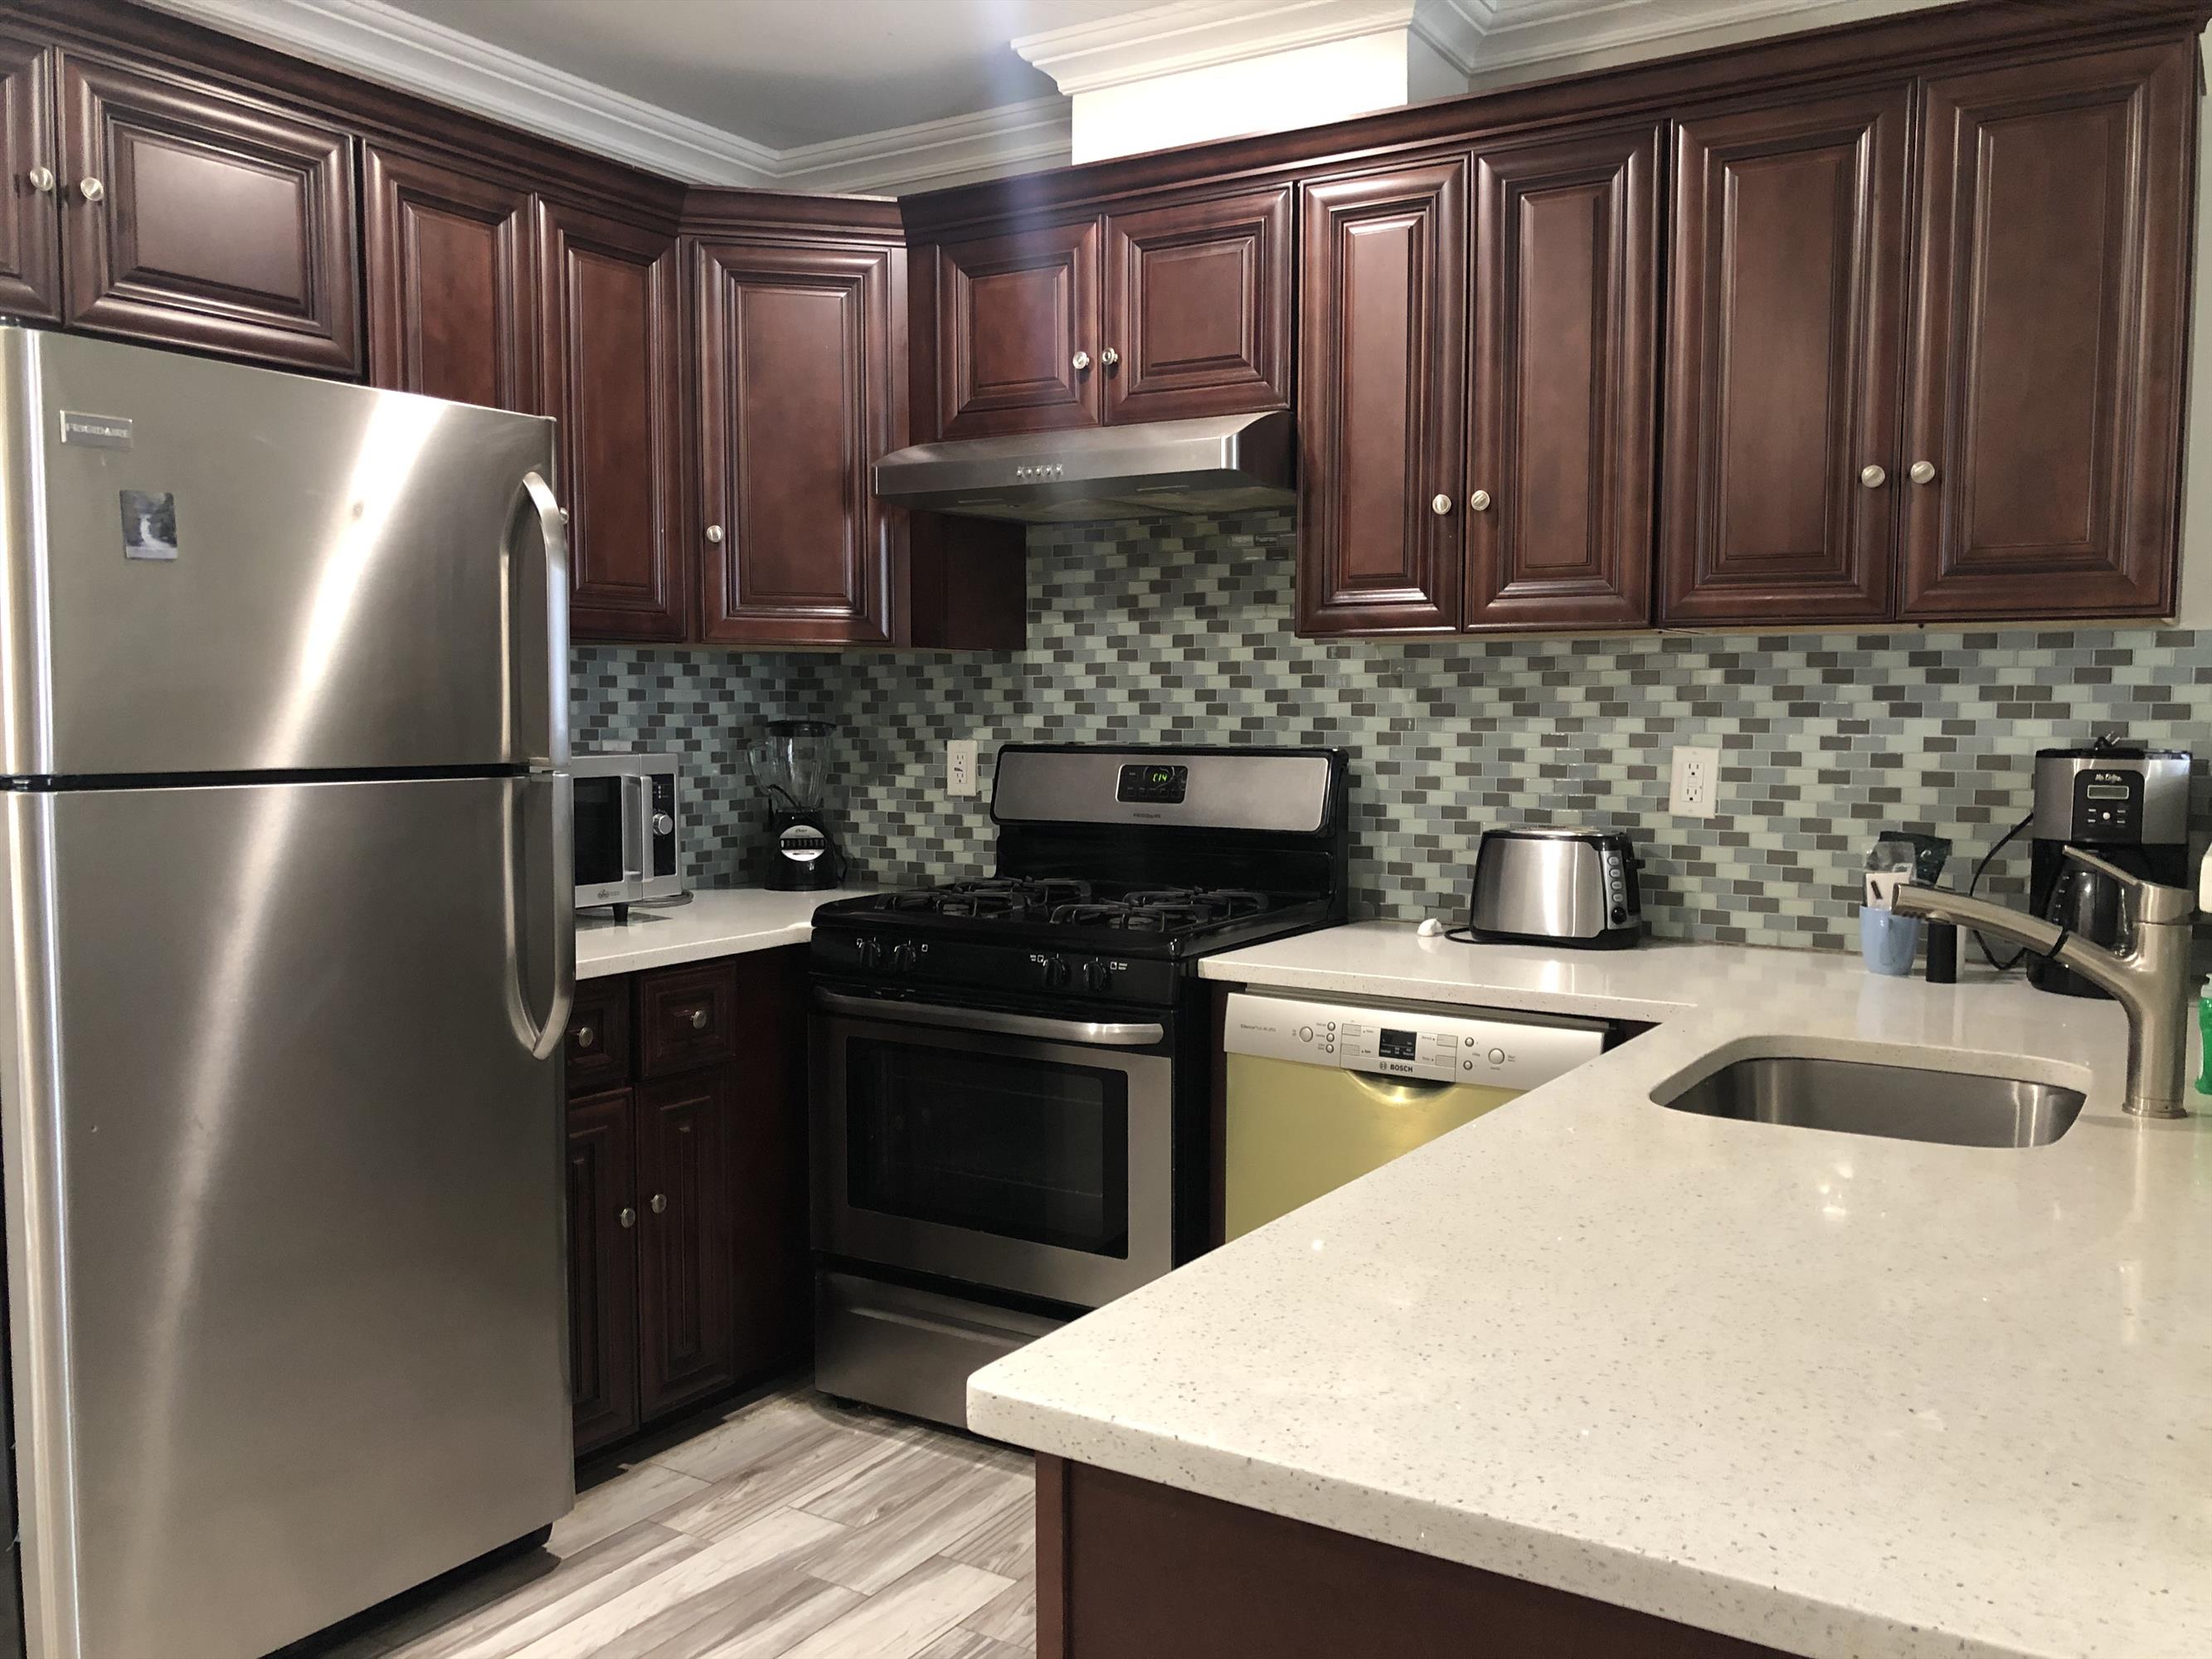 2BD/1Ba in new rental building in the highly desirable Journal Square neighborhood. Just a short blocks from the PATH train station. Open layout kitchen with stainless steel appliances (refrigerator, stove and dishwasher) and granite counter-tops. The Two bedrooms can accommodate queen-size beds.  Unit is flooded with natural light. Shared Laundry and INDOOR parking available to rent! Available for May 15th occupancy or sooner. Broker's fee applies.